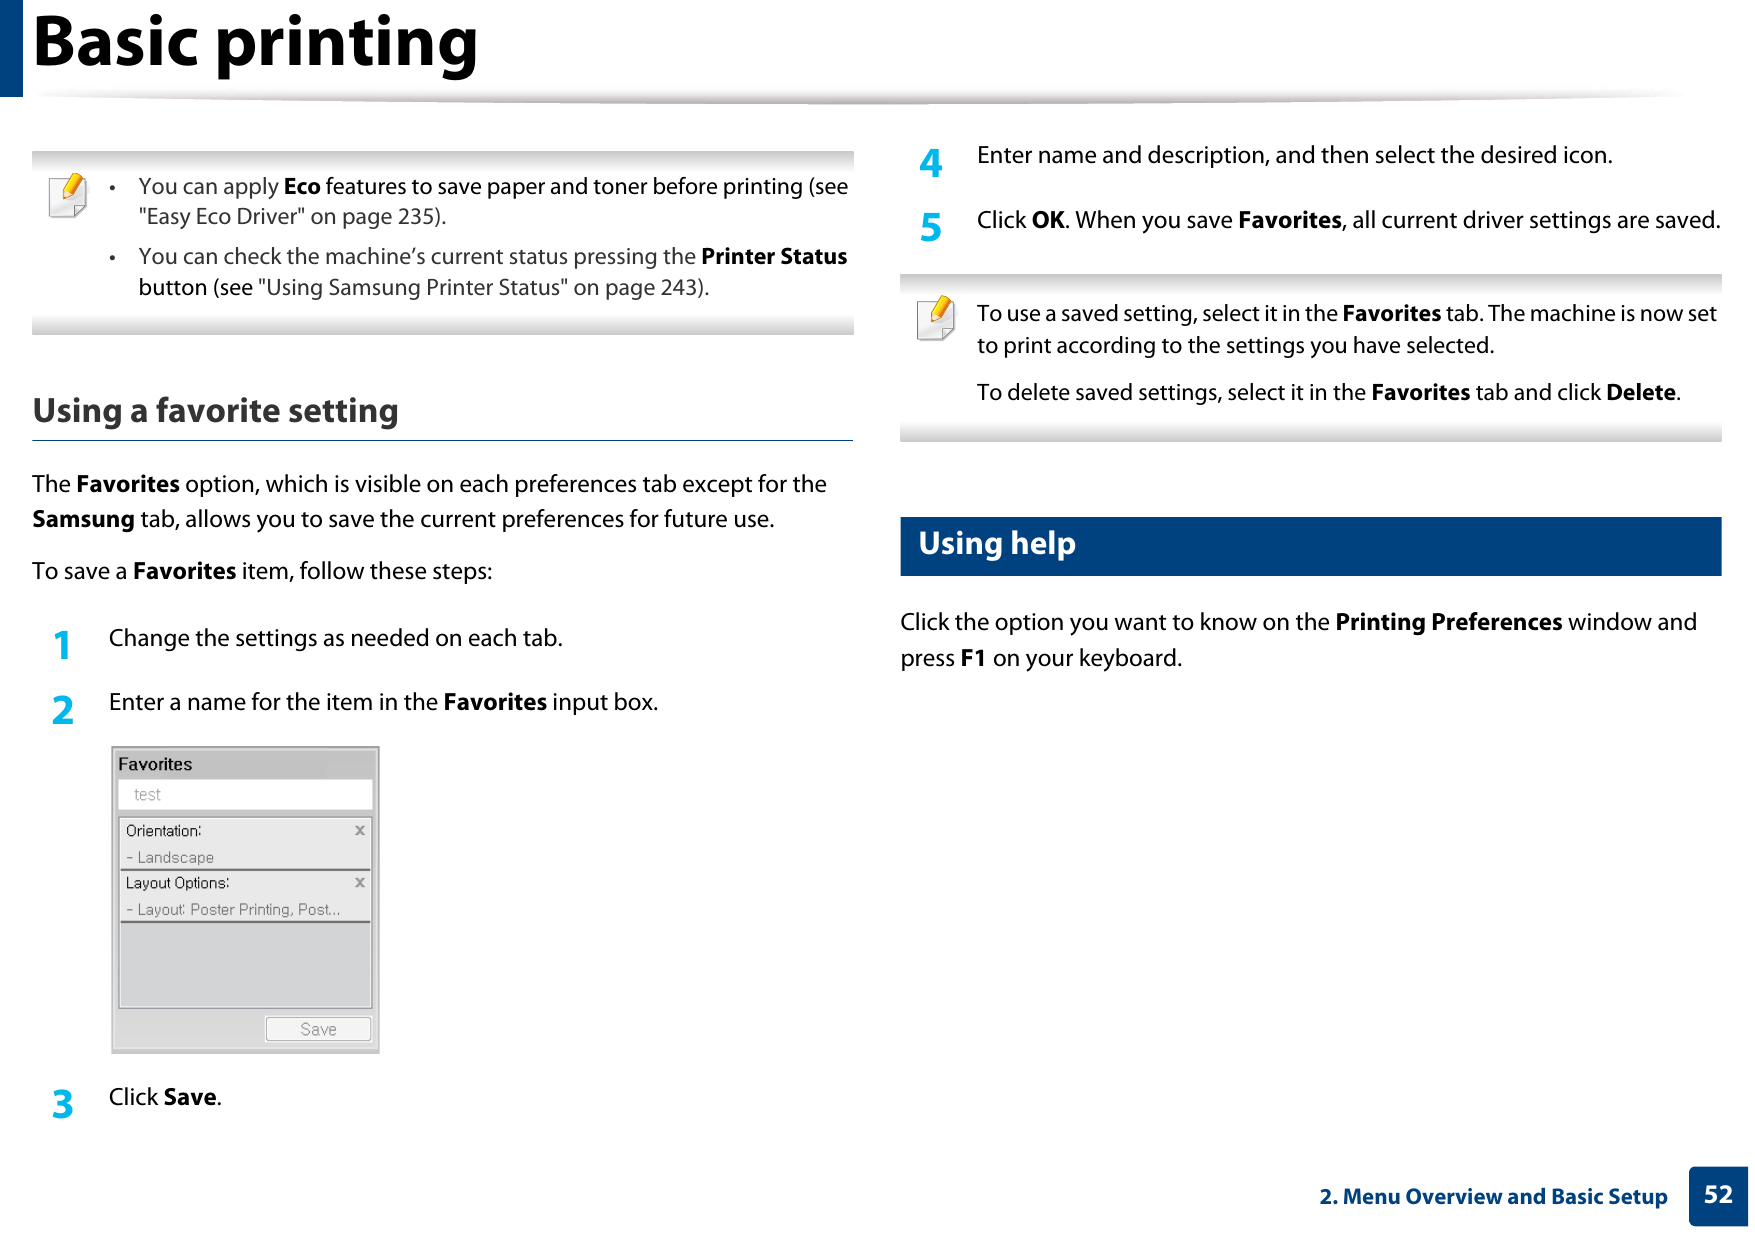 Basic printing522. Menu Overview and Basic Setup •You can apply Eco features to save paper and toner before printing (see &quot;Easy Eco Driver&quot; on page 235).• You can check the machine’s current status pressing the Printer Status button (see &quot;Using Samsung Printer Status&quot; on page 243). Using a favorite settingThe Favorites option, which is visible on each preferences tab except for the Samsung tab, allows you to save the current preferences for future use.To save a Favorites item, follow these steps:1Change the settings as needed on each tab. 2  Enter a name for the item in the Favorites input box.3  Click Save. 4  Enter name and description, and then select the desired icon.5  Click OK. When you save Favorites, all current driver settings are saved. To use a saved setting, select it in the Favorites tab. The machine is now set to print according to the settings you have selected.To delete saved settings, select it in the Favorites tab and click Delete.  11 Using helpClick the option you want to know on the Printing Preferences window and press F1 on your keyboard.